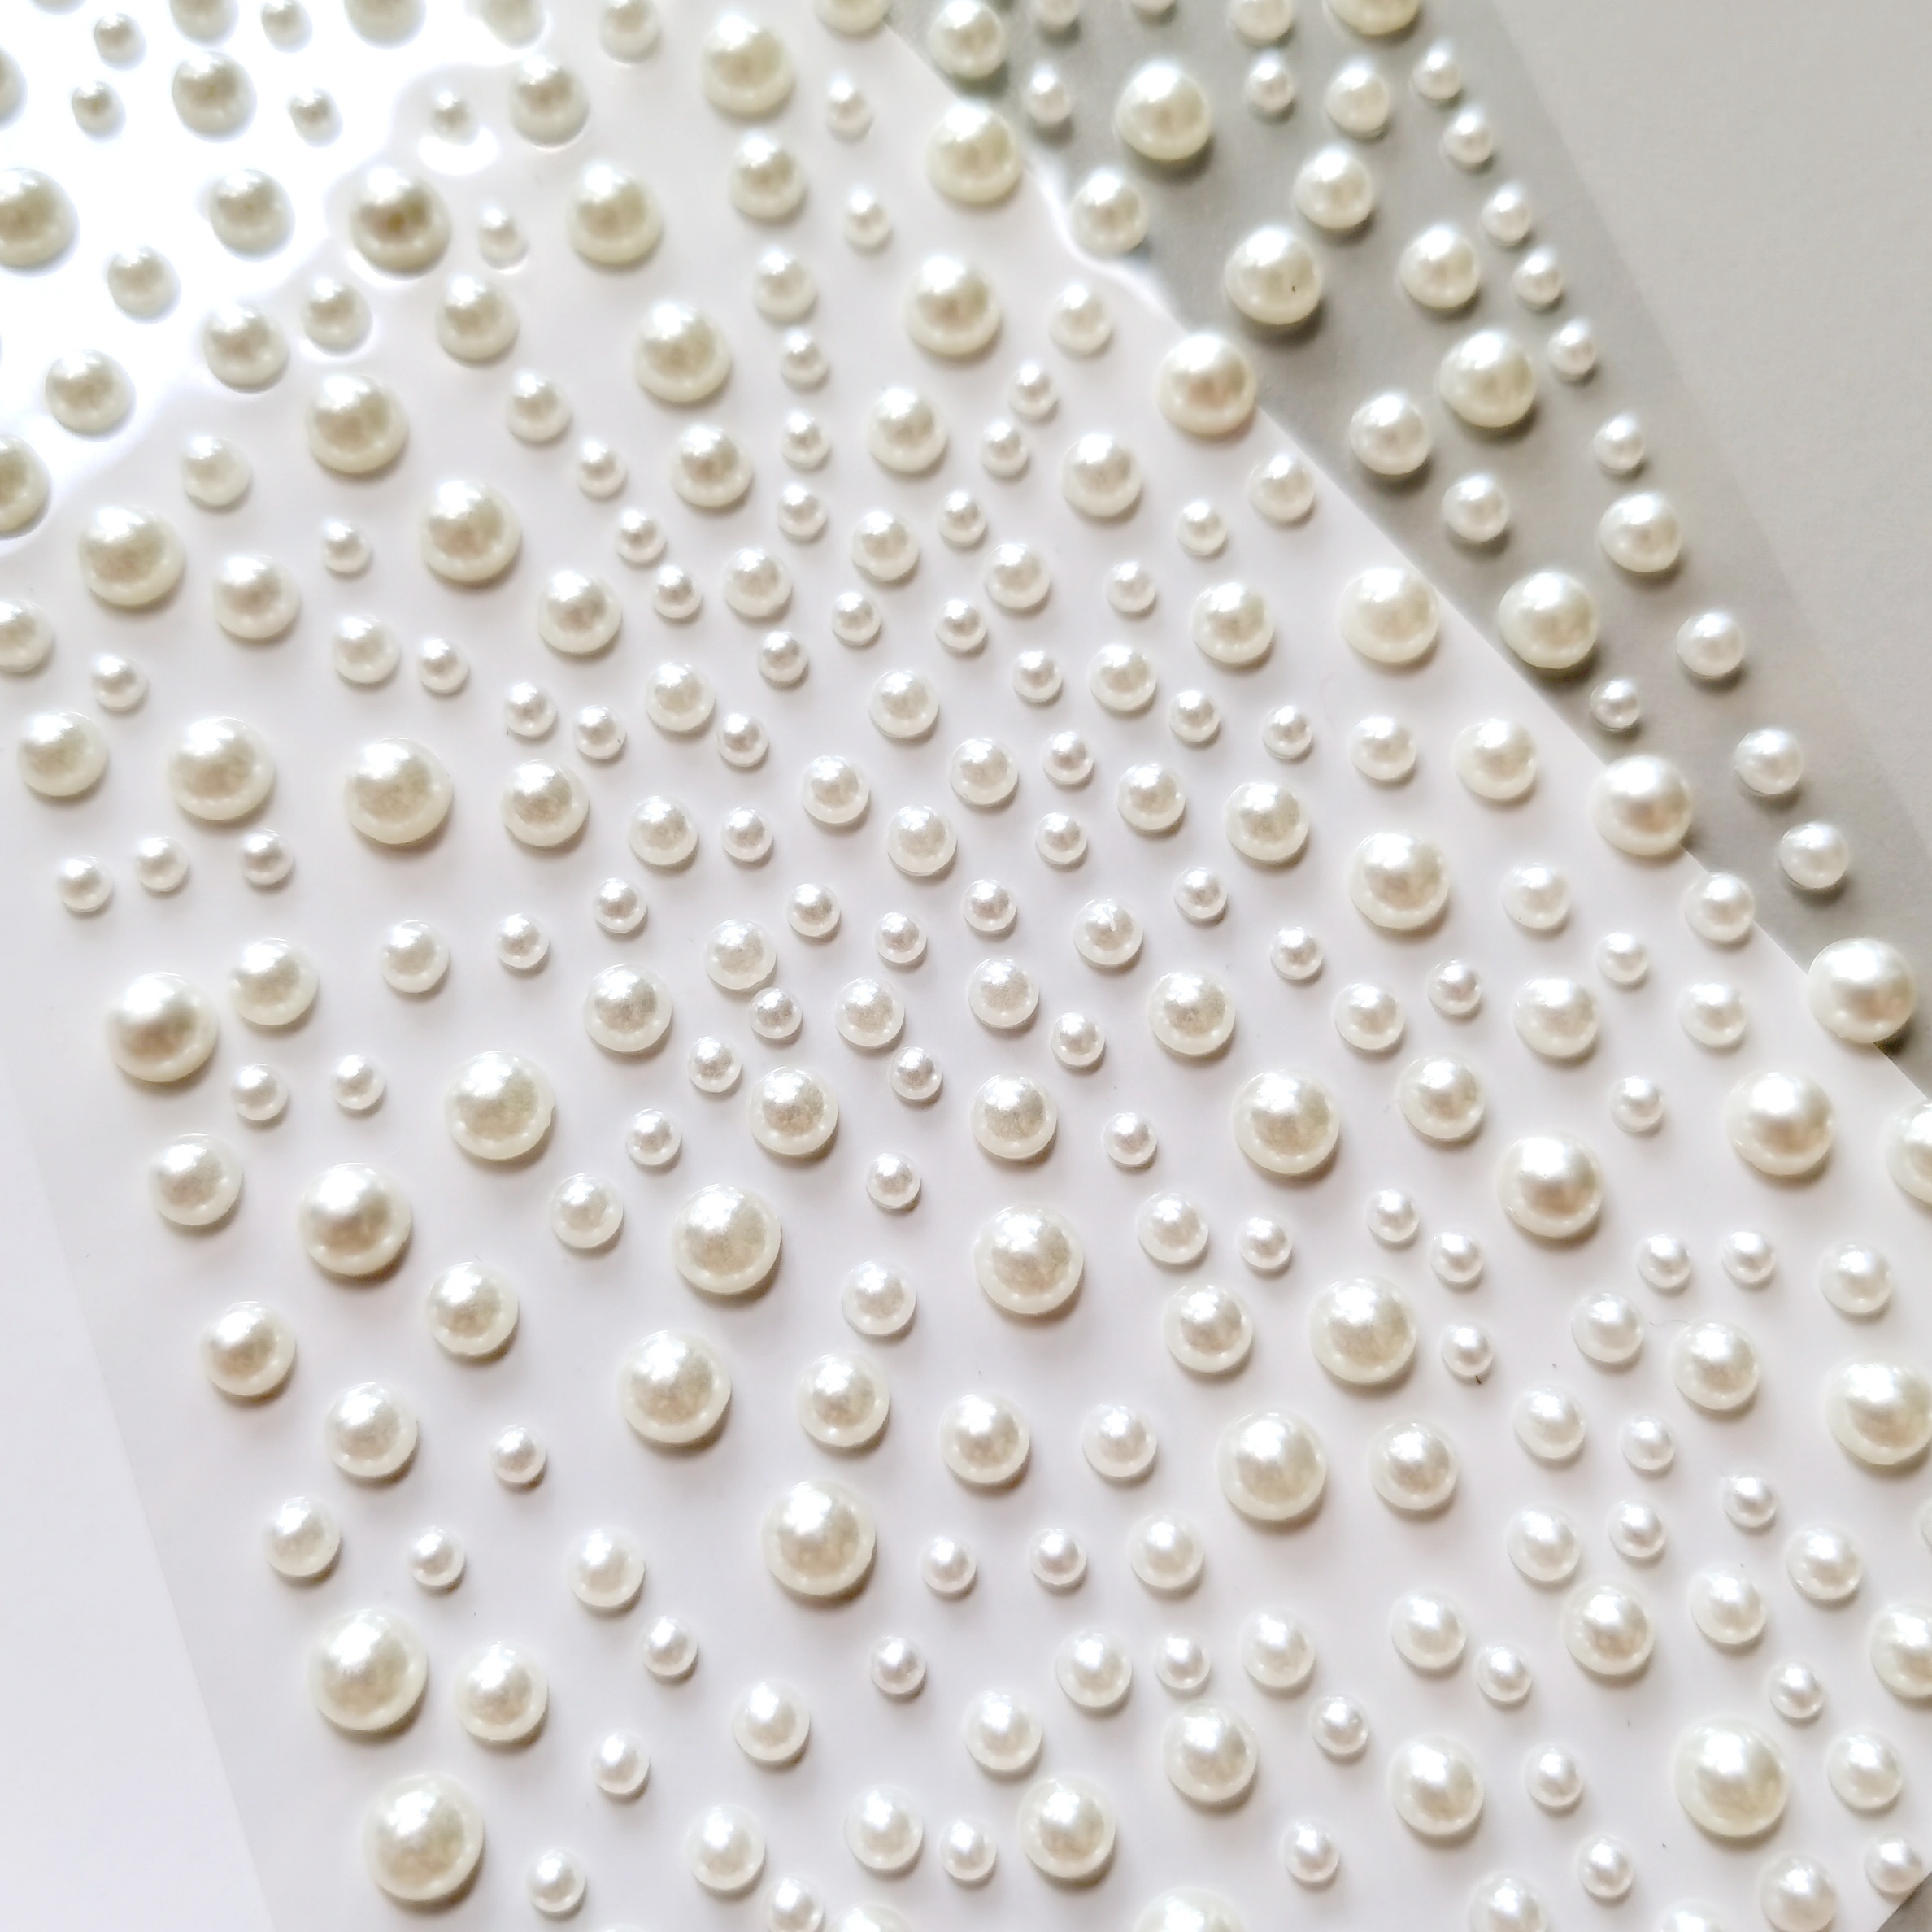 Wrapables 900-Piece Self Adhesive Pearl Stickers 4mm